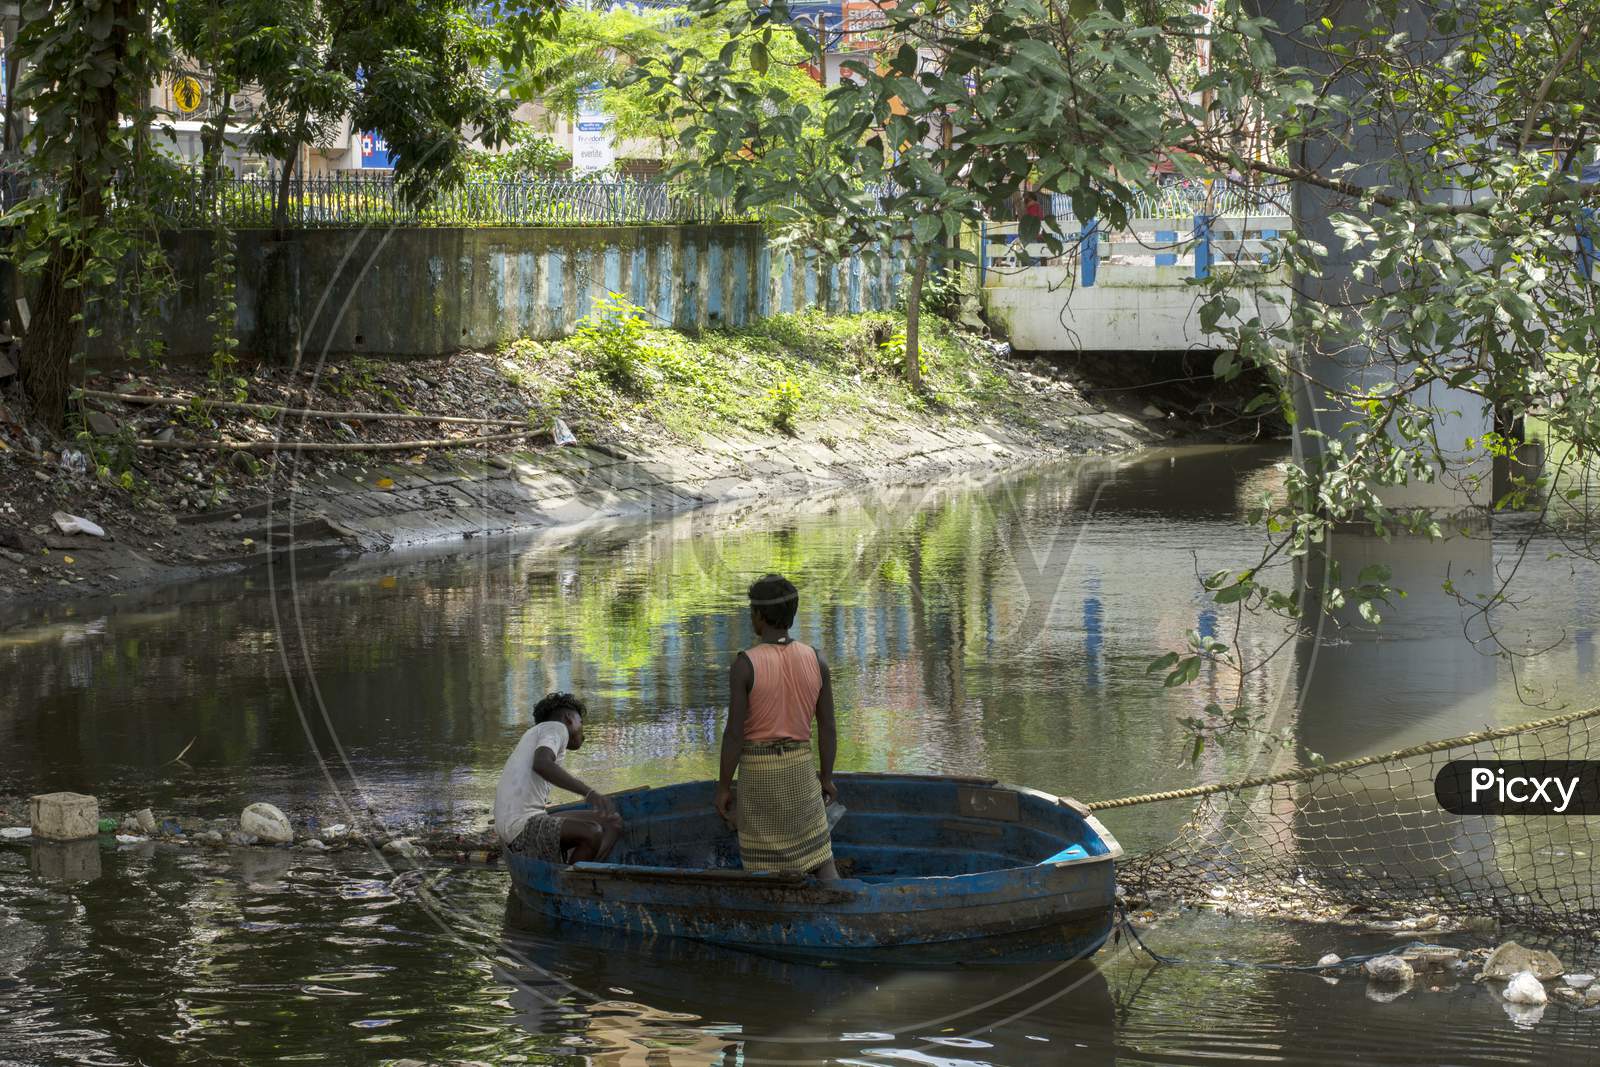 15Th August, 2021, Kolkata, West Bengal, India: A Person On Boat Trying To Clean Canal By Removing Garbage With His Bare Hand In Kolkata, India.